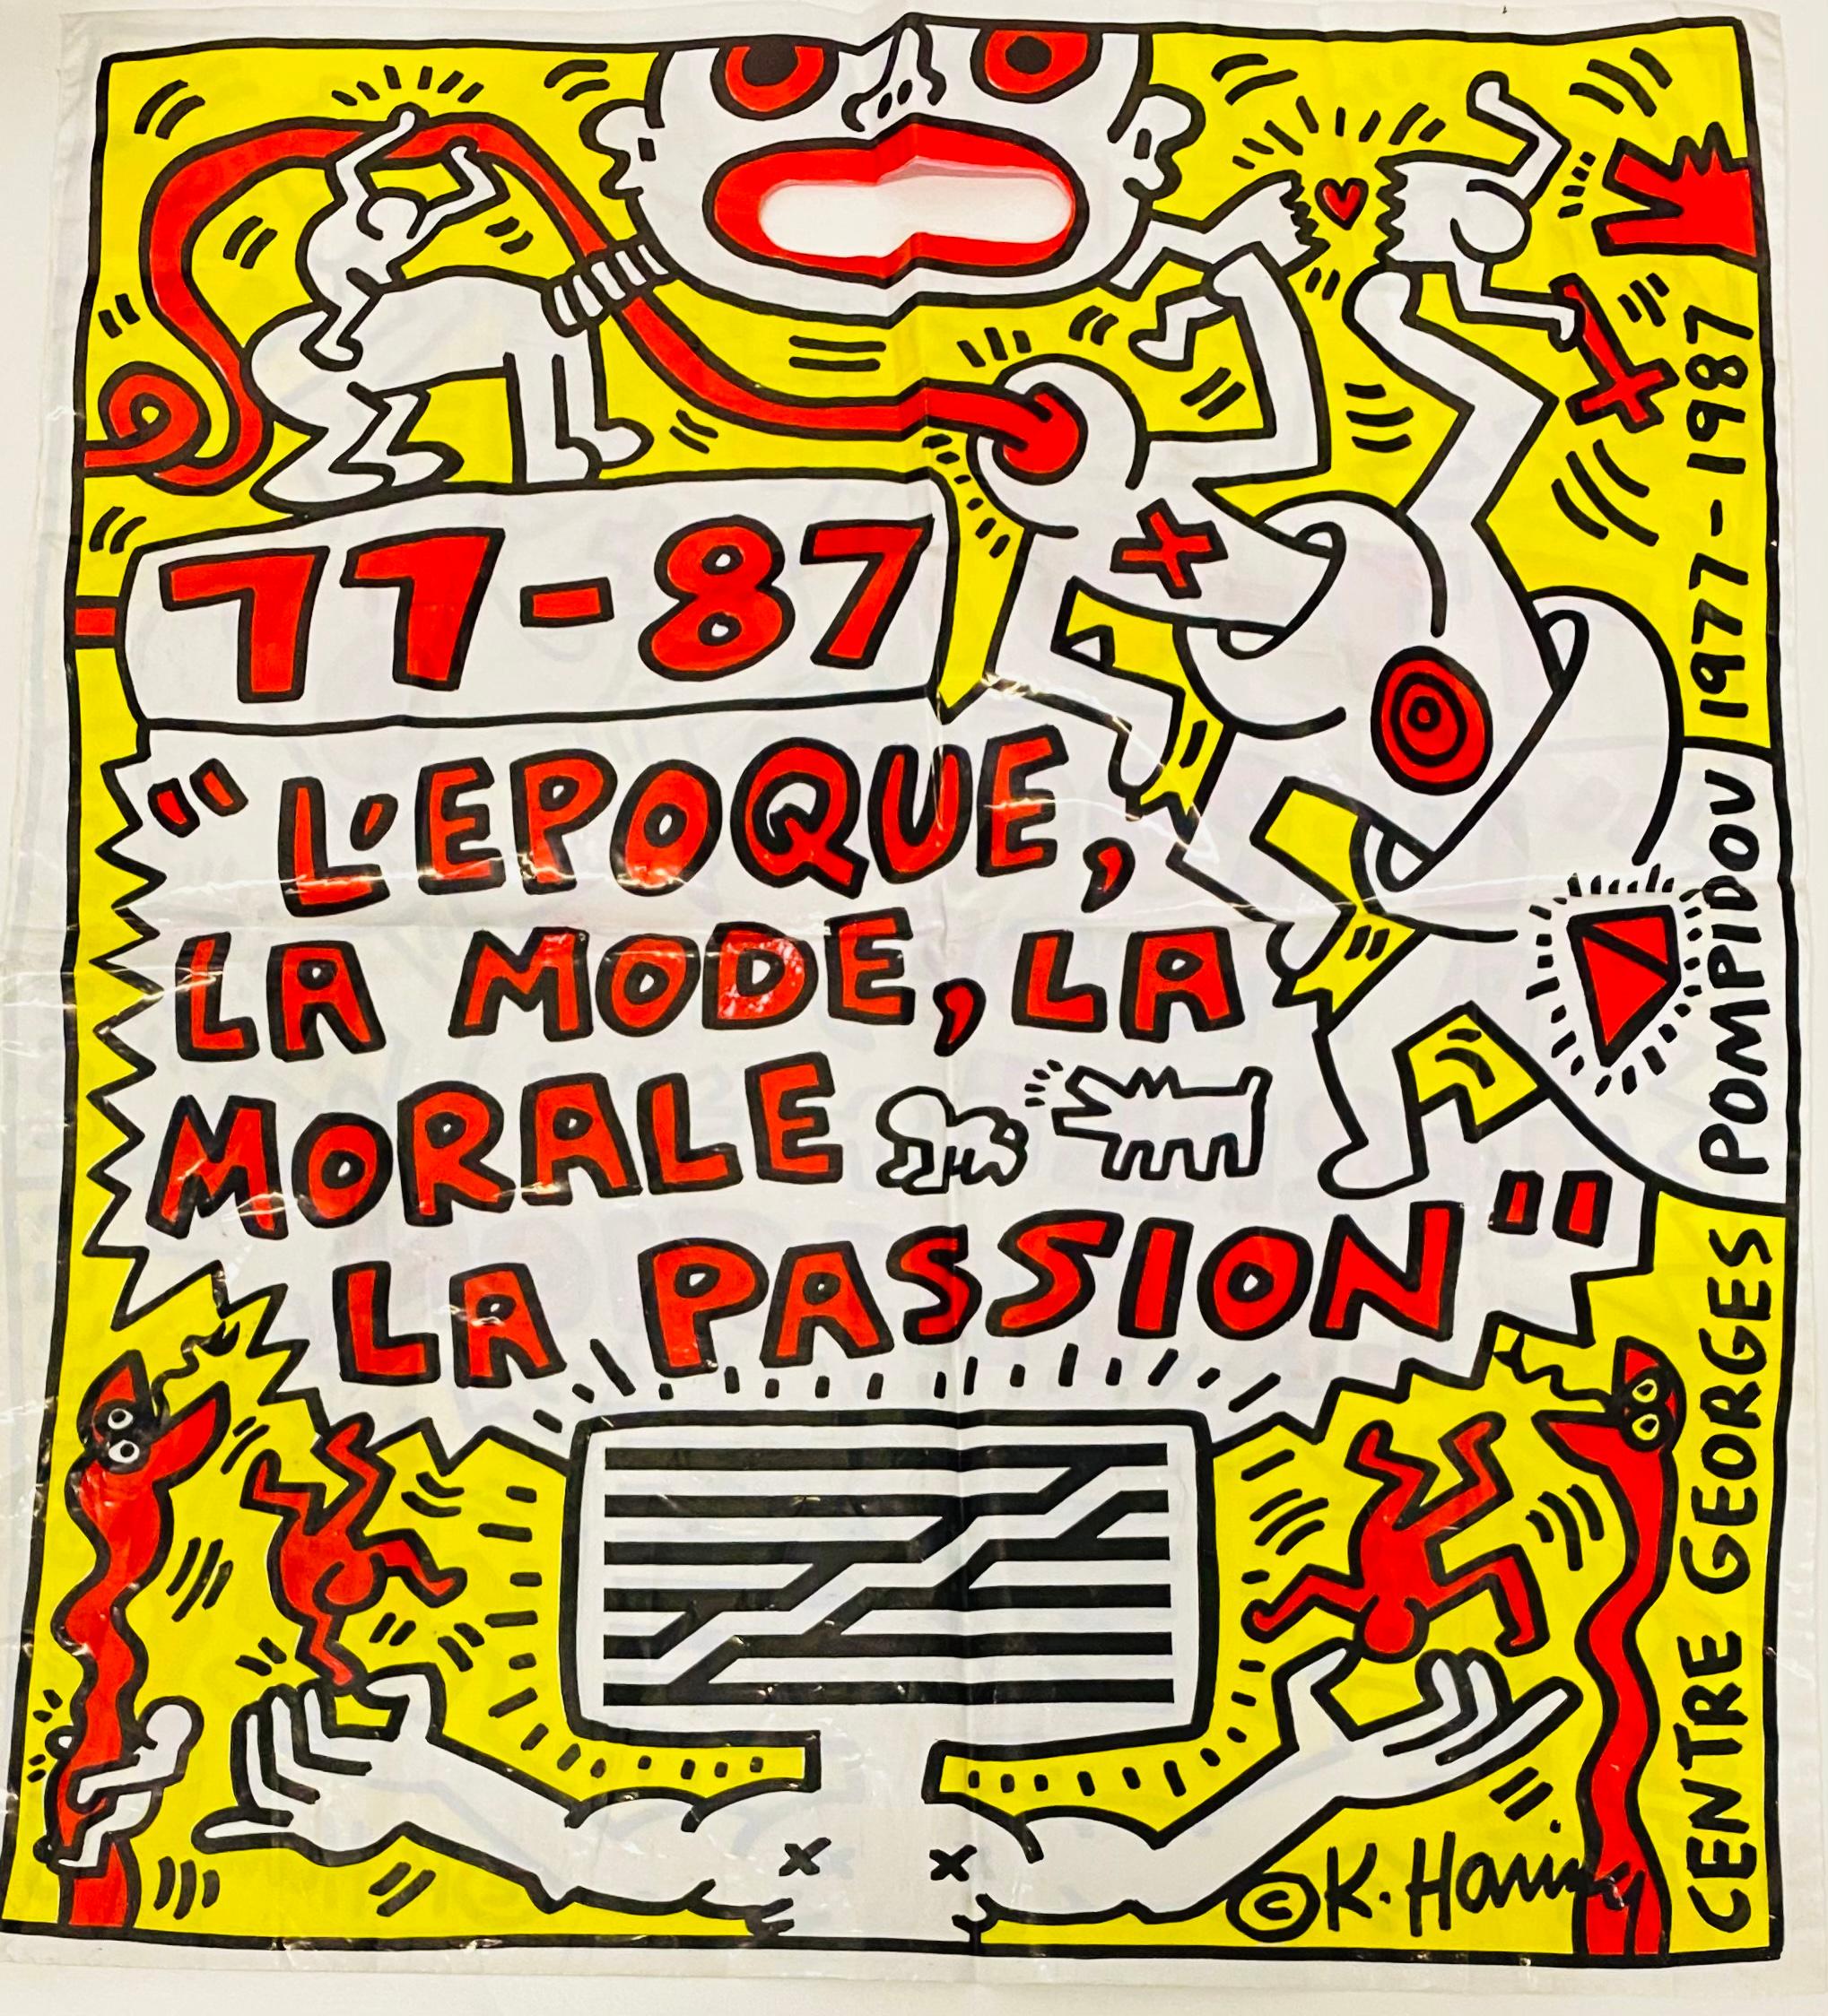 Keith Haring Paris, 1987:
Well-suited for framing, this vibrant oversized illustrated bag was designed by Keith Haring during his lifetime for the Pompidou exhibit:

L’Epoque, La Mode, La Morale, La Passion: Aspectsde l’Art d’ Aujourd’hui,